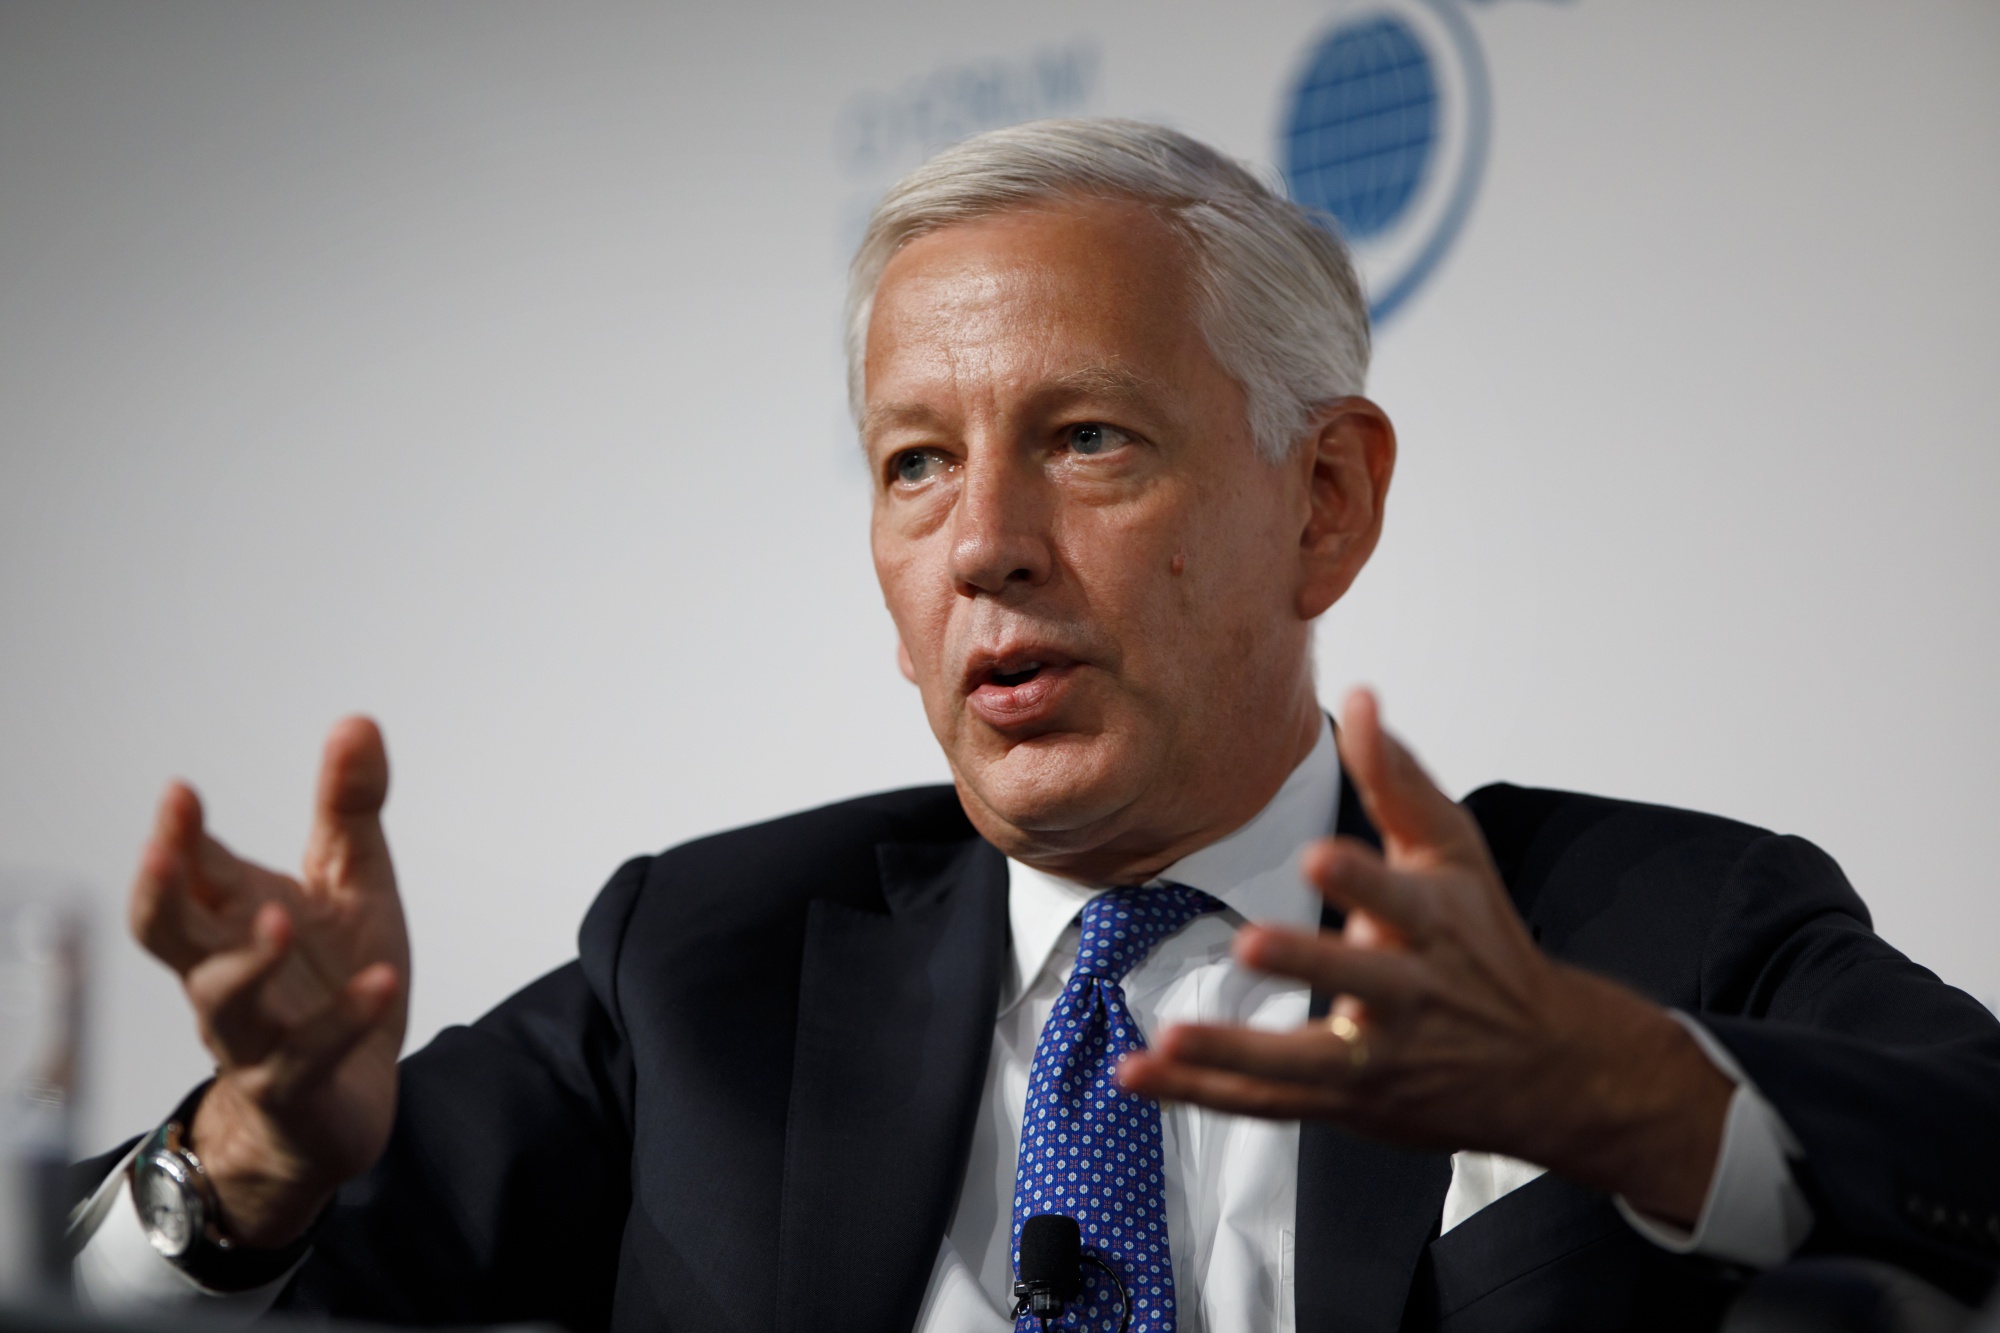 Canada’s Ambassador to China Dominic Barton Steps Down After Huawei ...